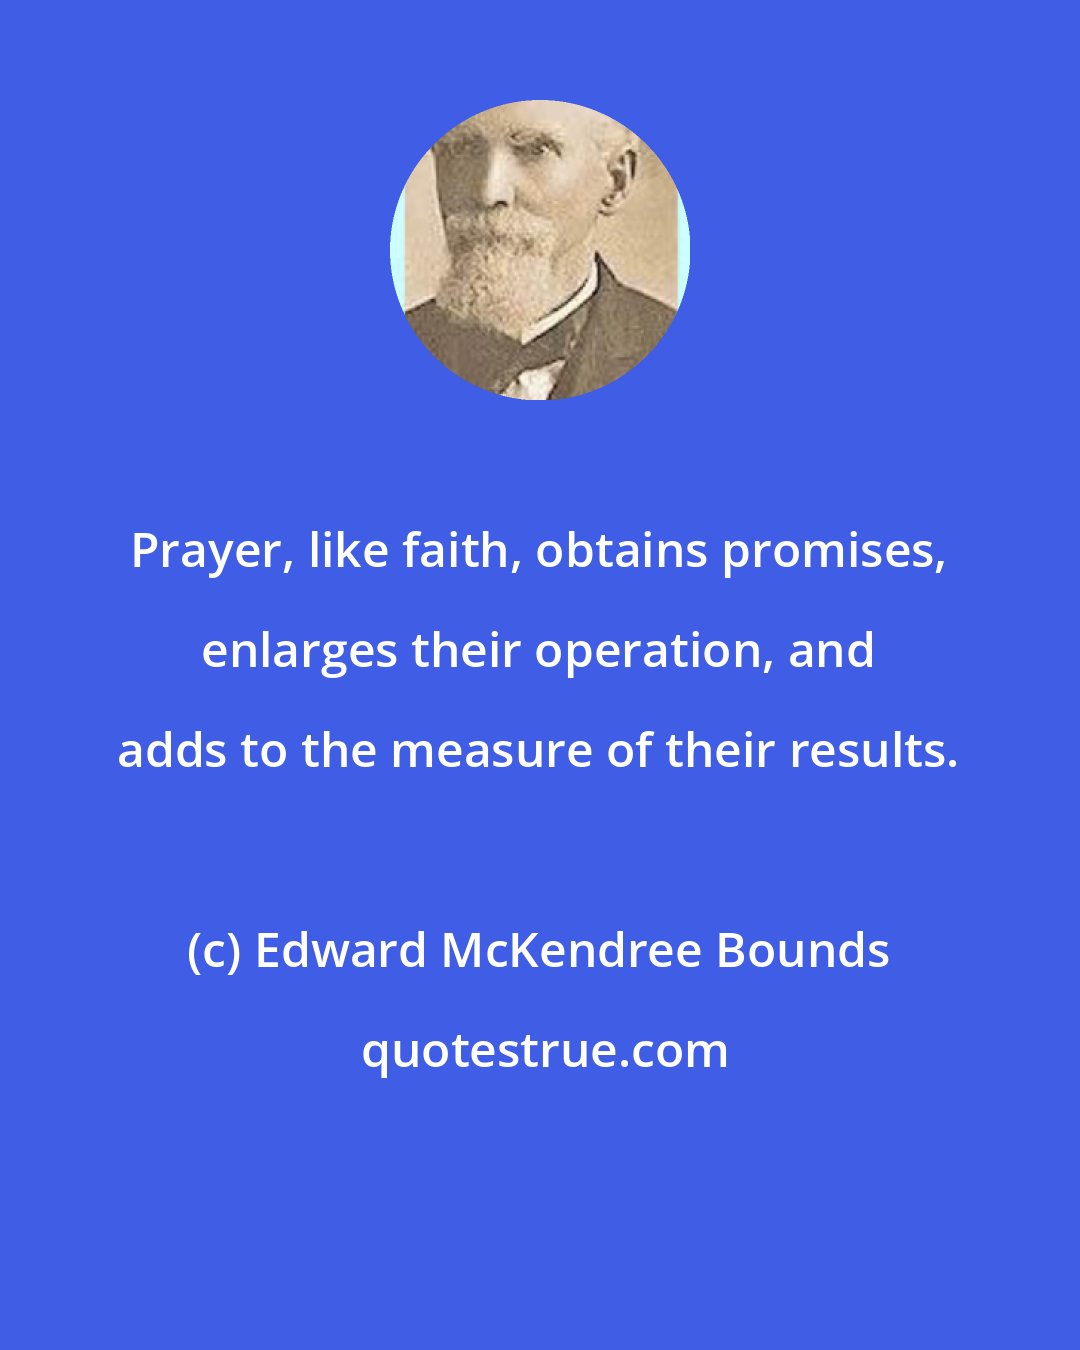 Edward McKendree Bounds: Prayer, like faith, obtains promises, enlarges their operation, and adds to the measure of their results.